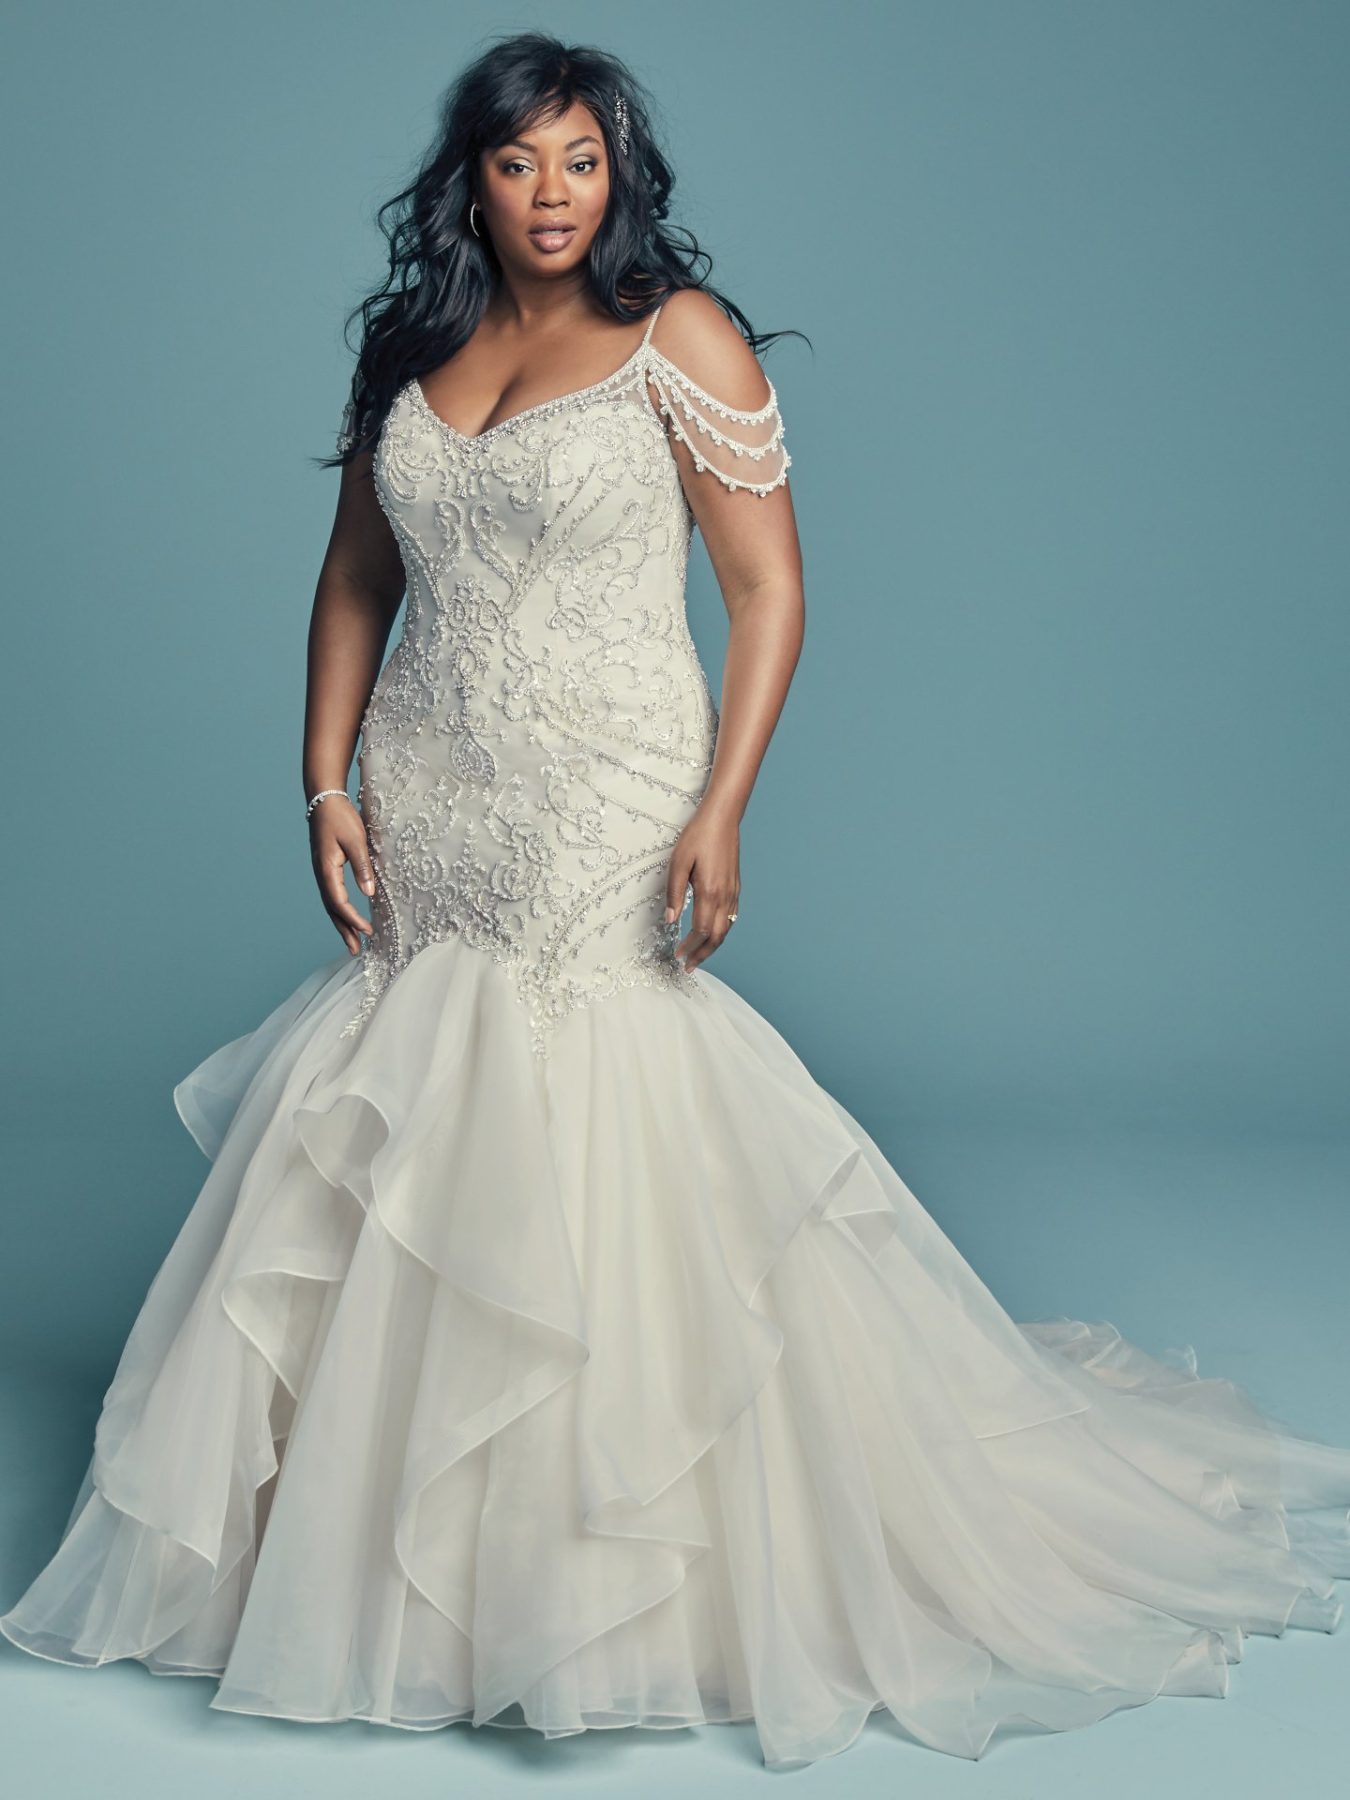 plus size wedding reception outfits